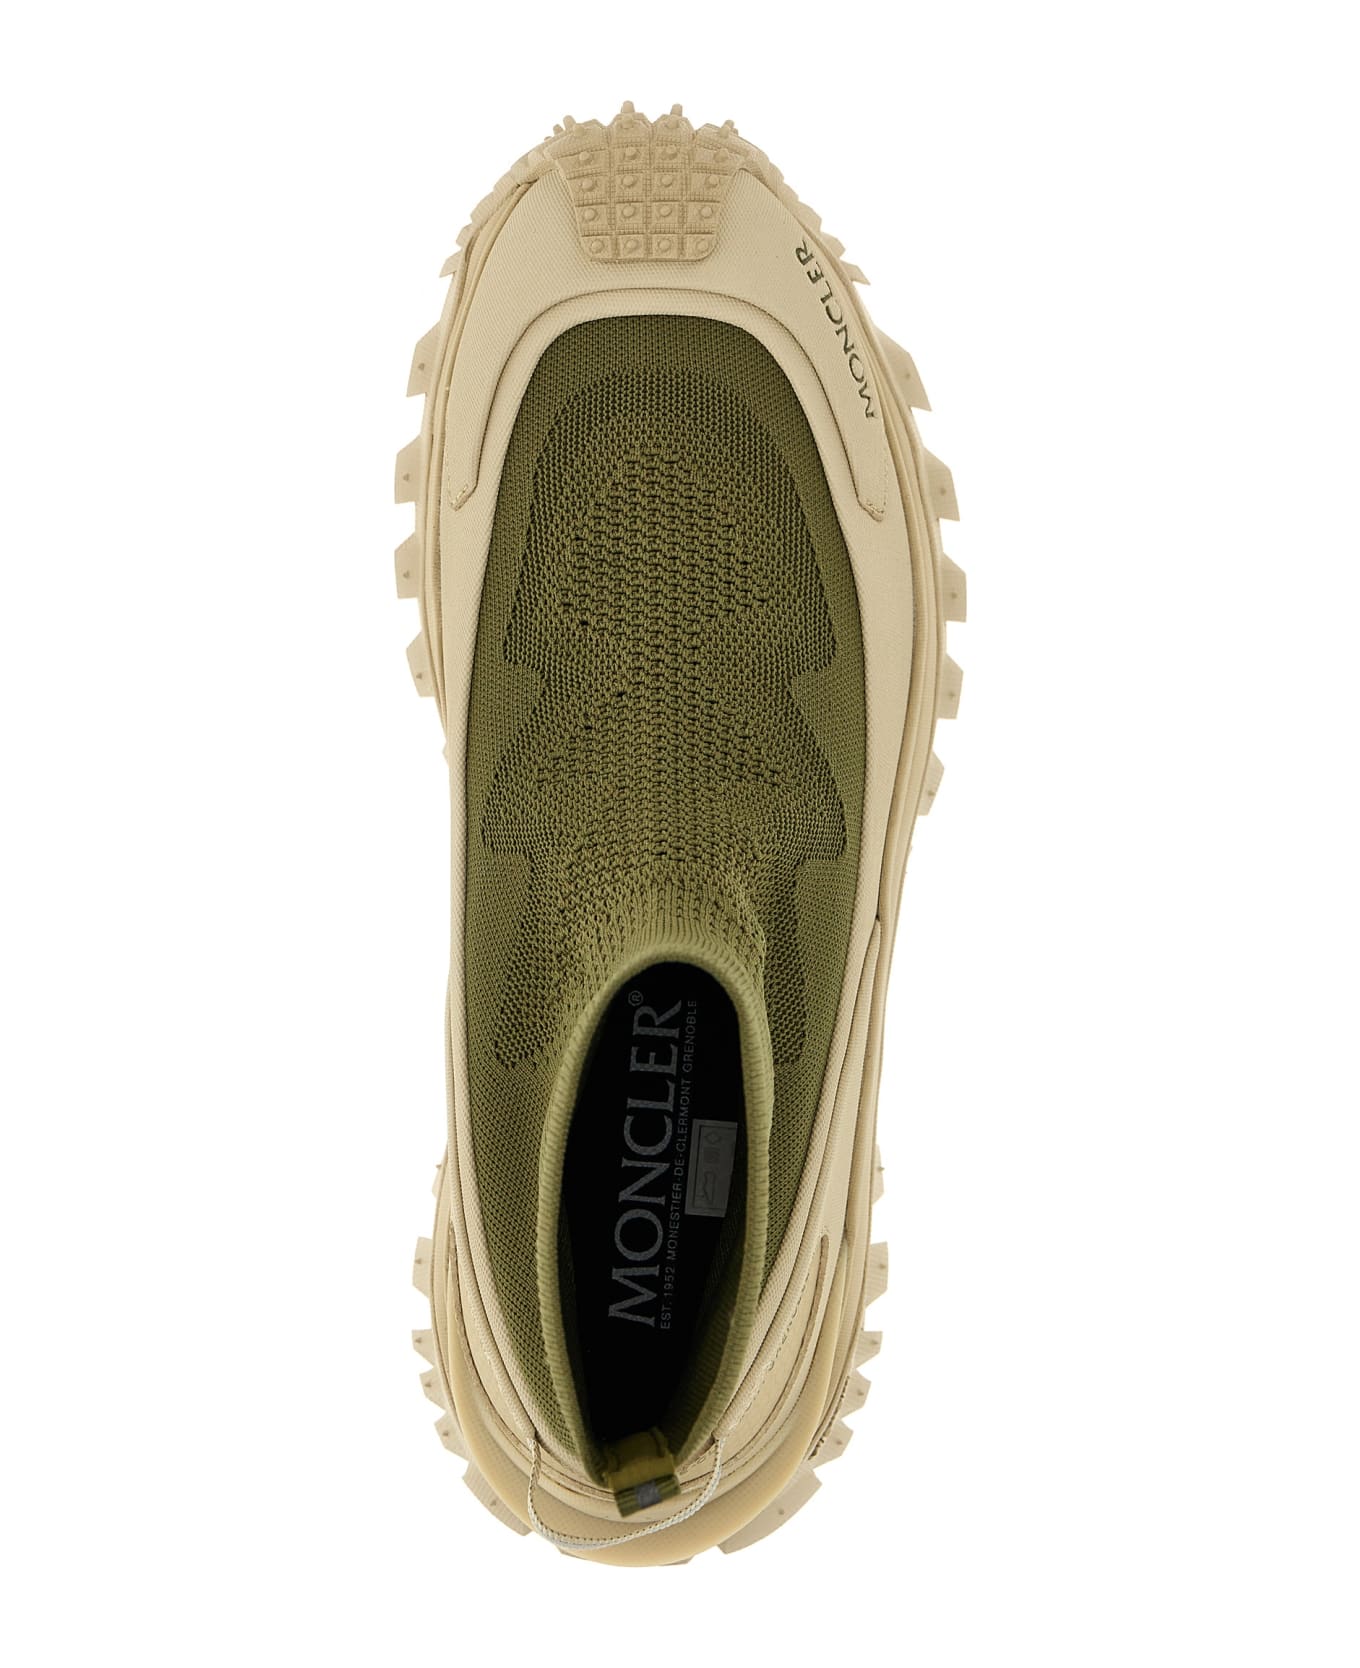 Moncler 'trailgrip Knit' Sneakers - Green